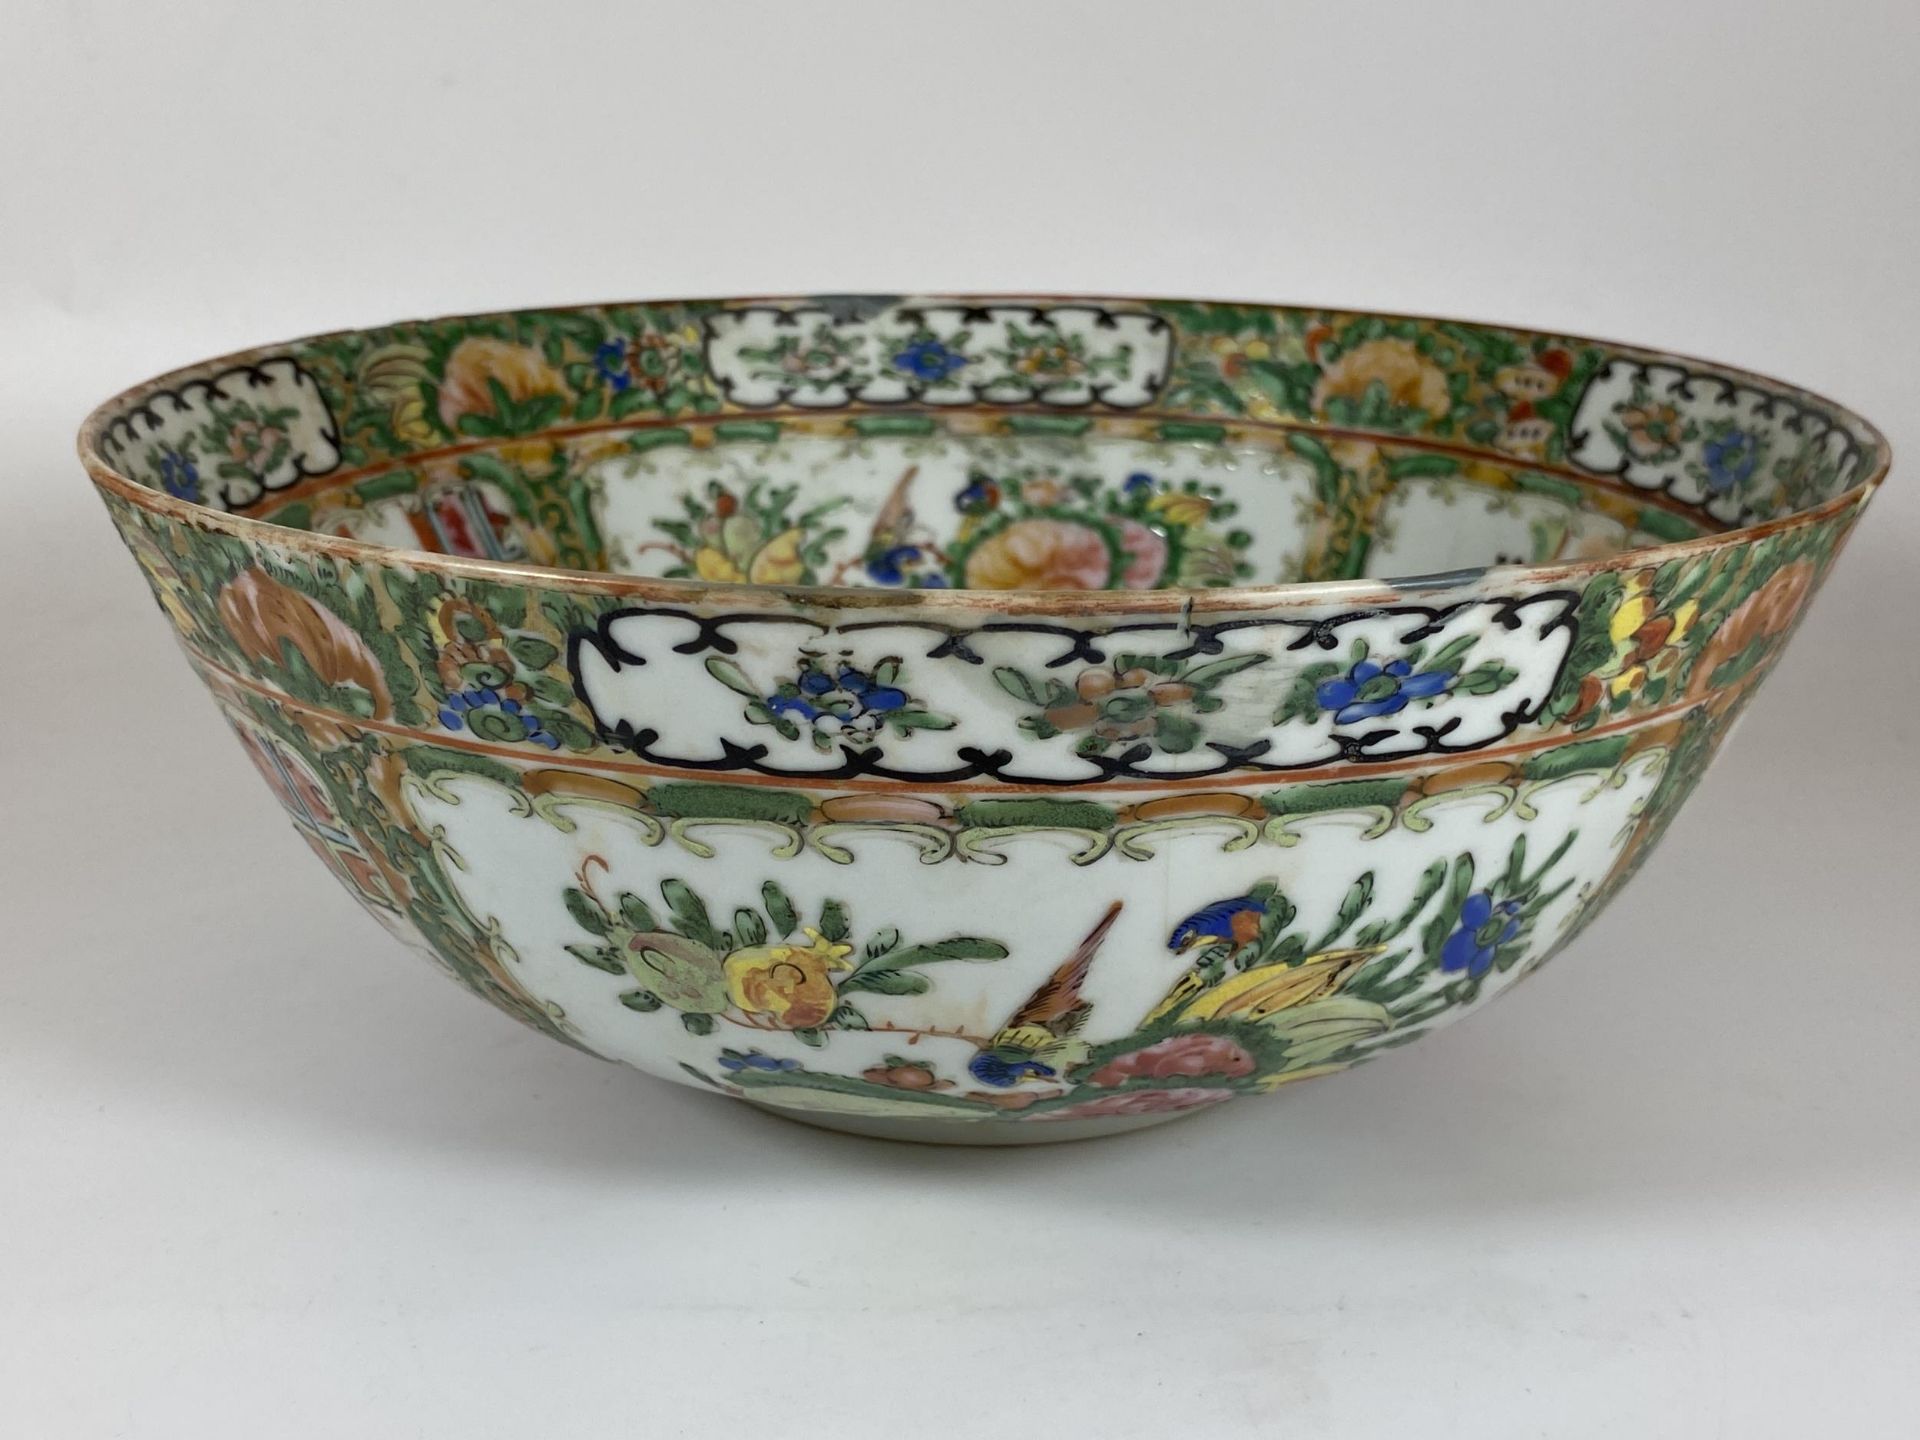 A 19TH CENTURY CHINESE CANTON FAMILLE ROSE MEDALLION PUNCH / FRUIT BOWL WITH FIGURES, BIRDS AND - Image 4 of 9